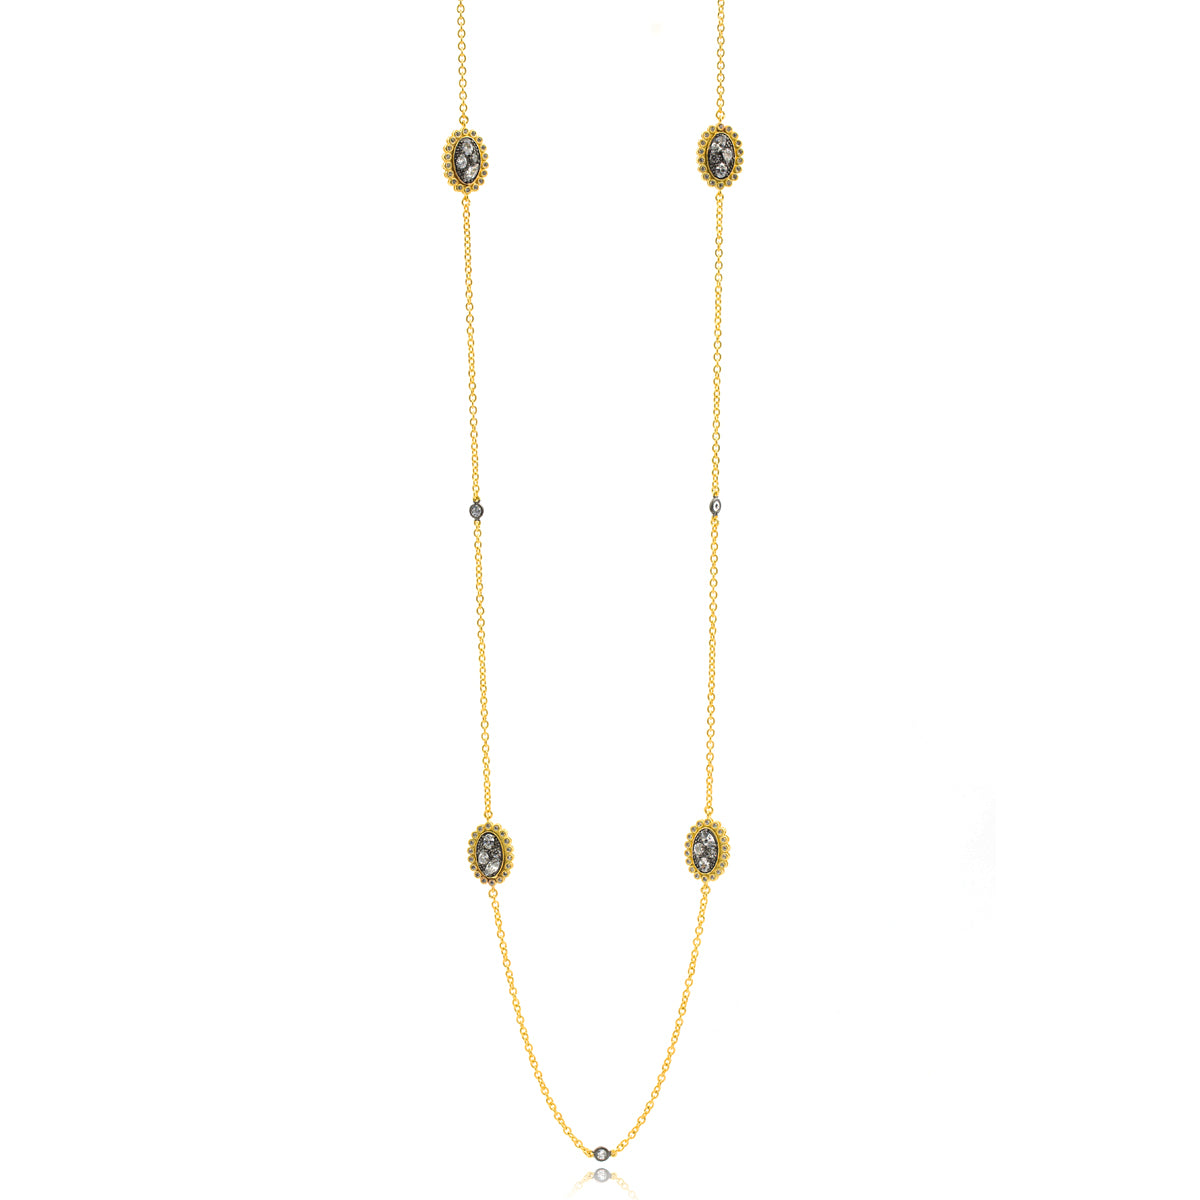 Freida Rothman 36" Station Necklace -ONLY 1 LEFT!